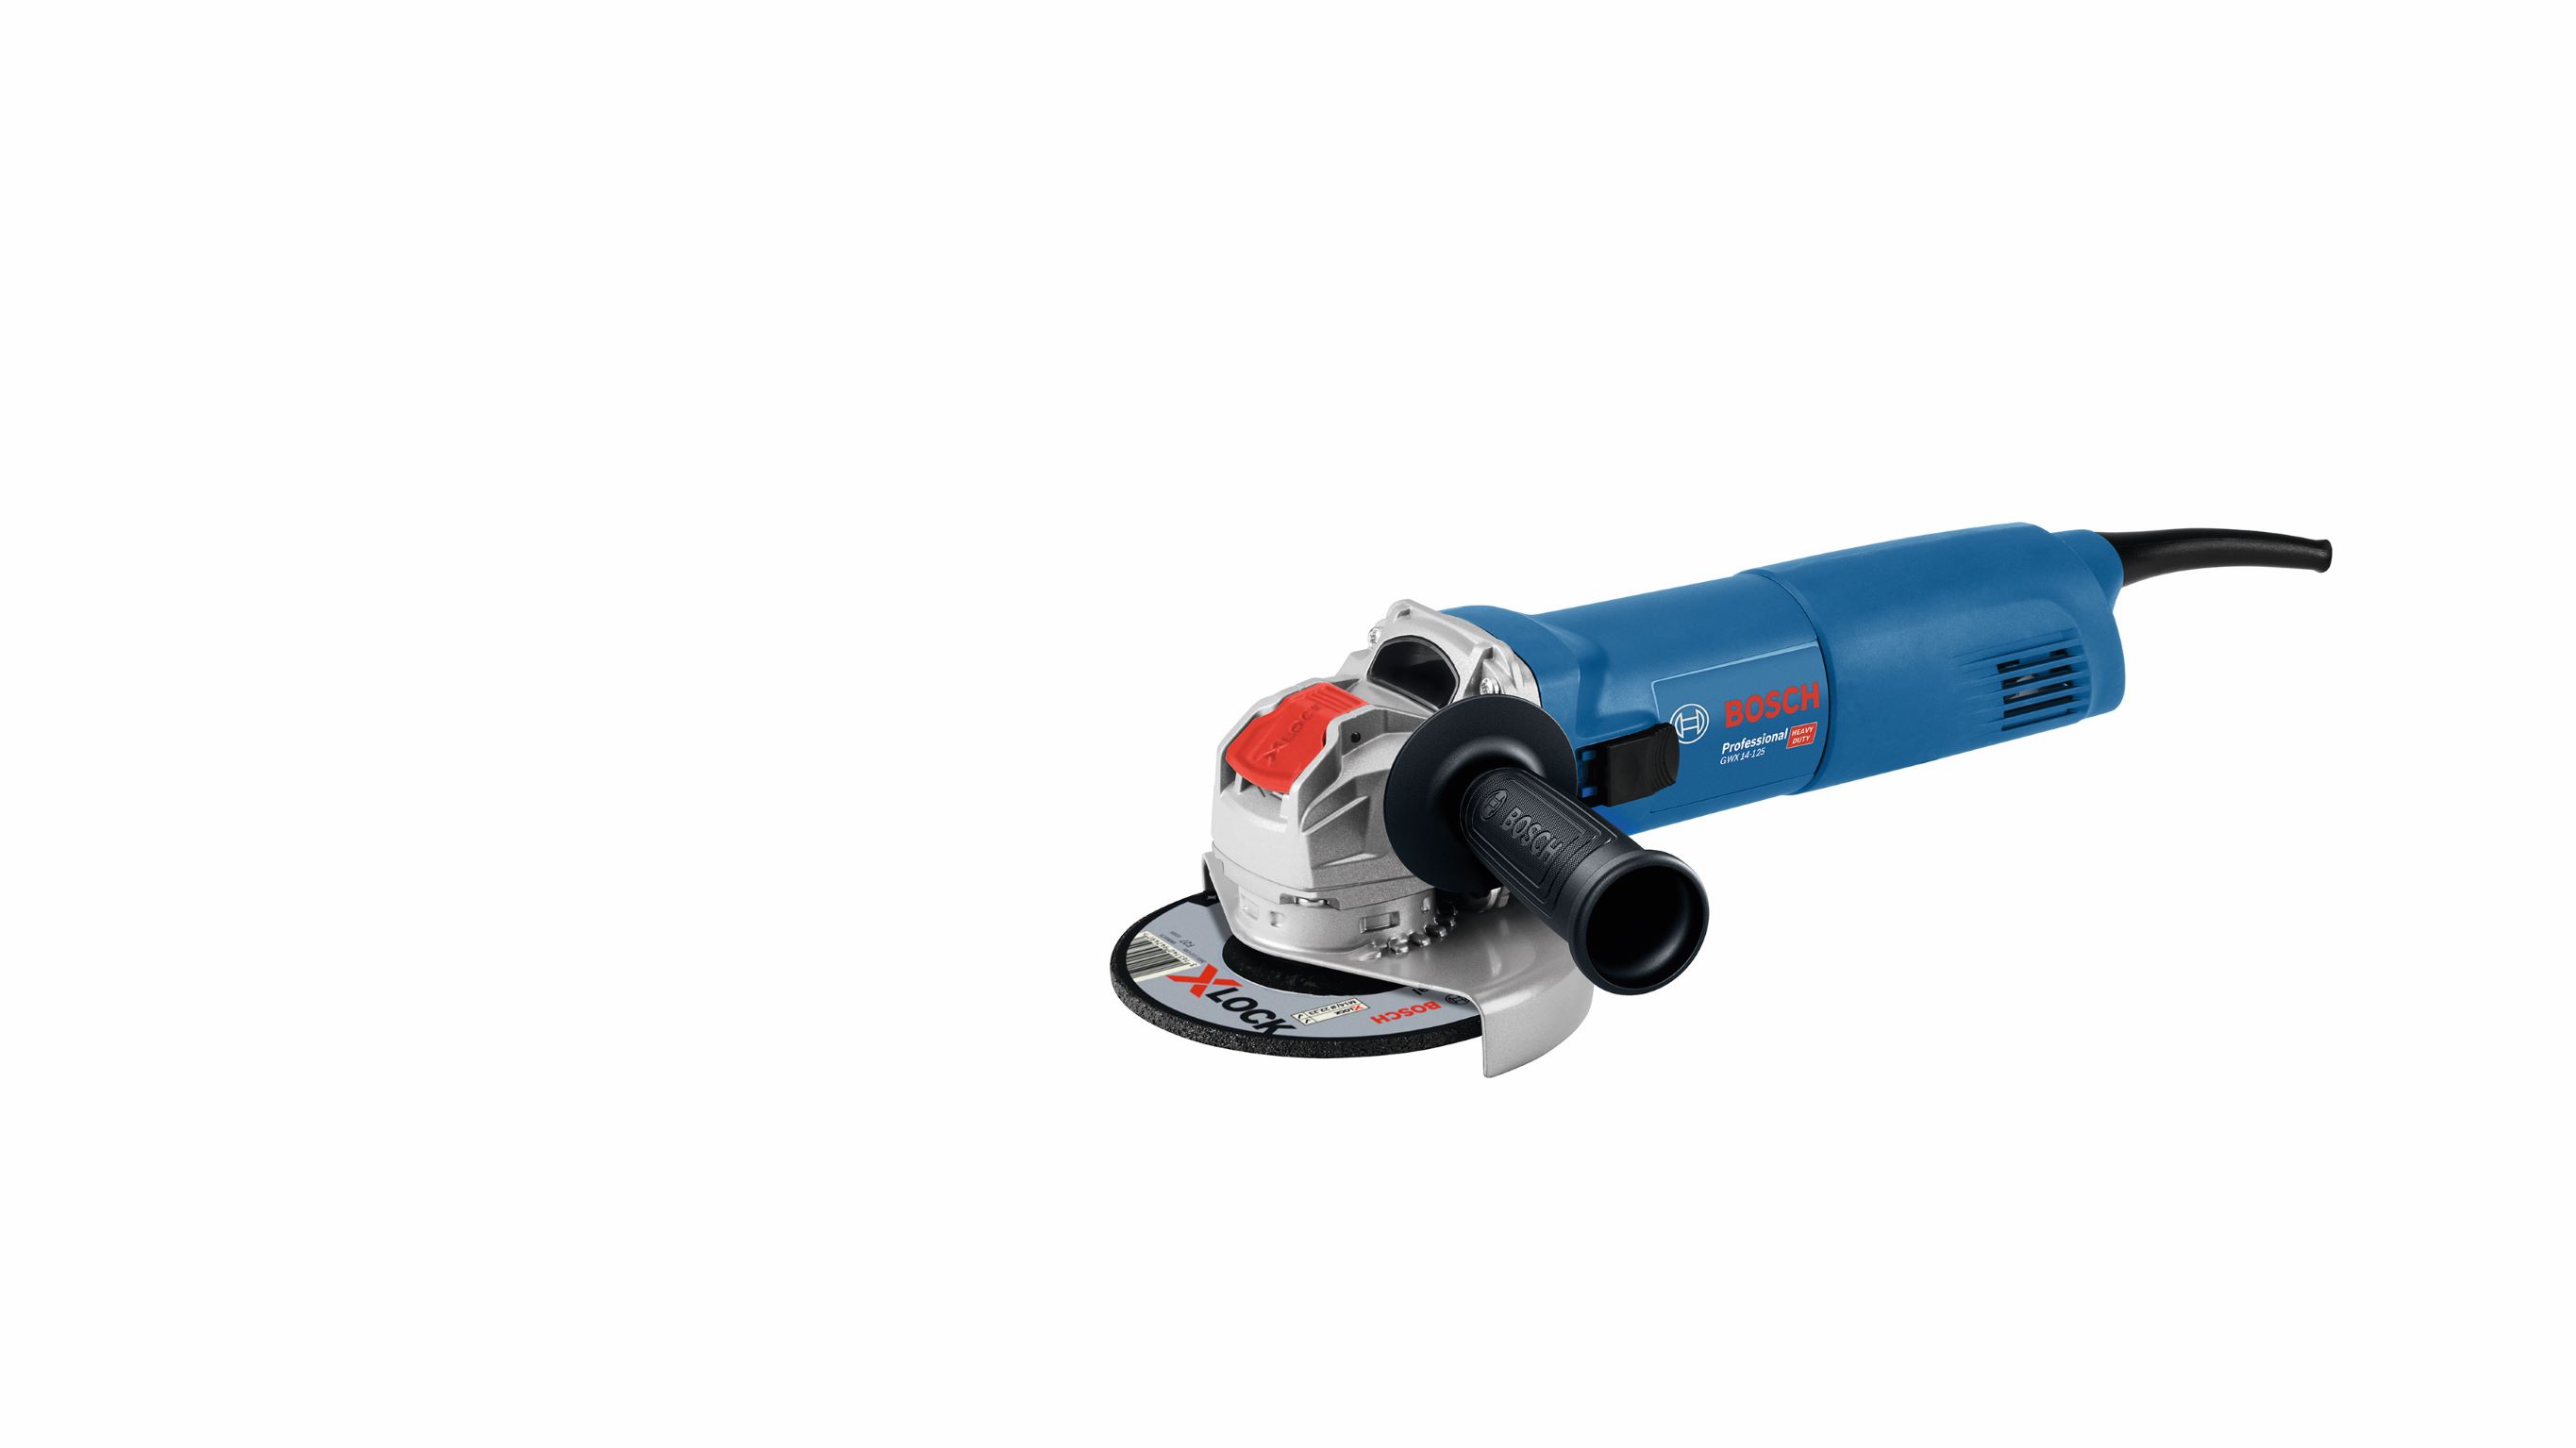 GWX 14-125 Professional Angle Grinder with X-LOCK - 3